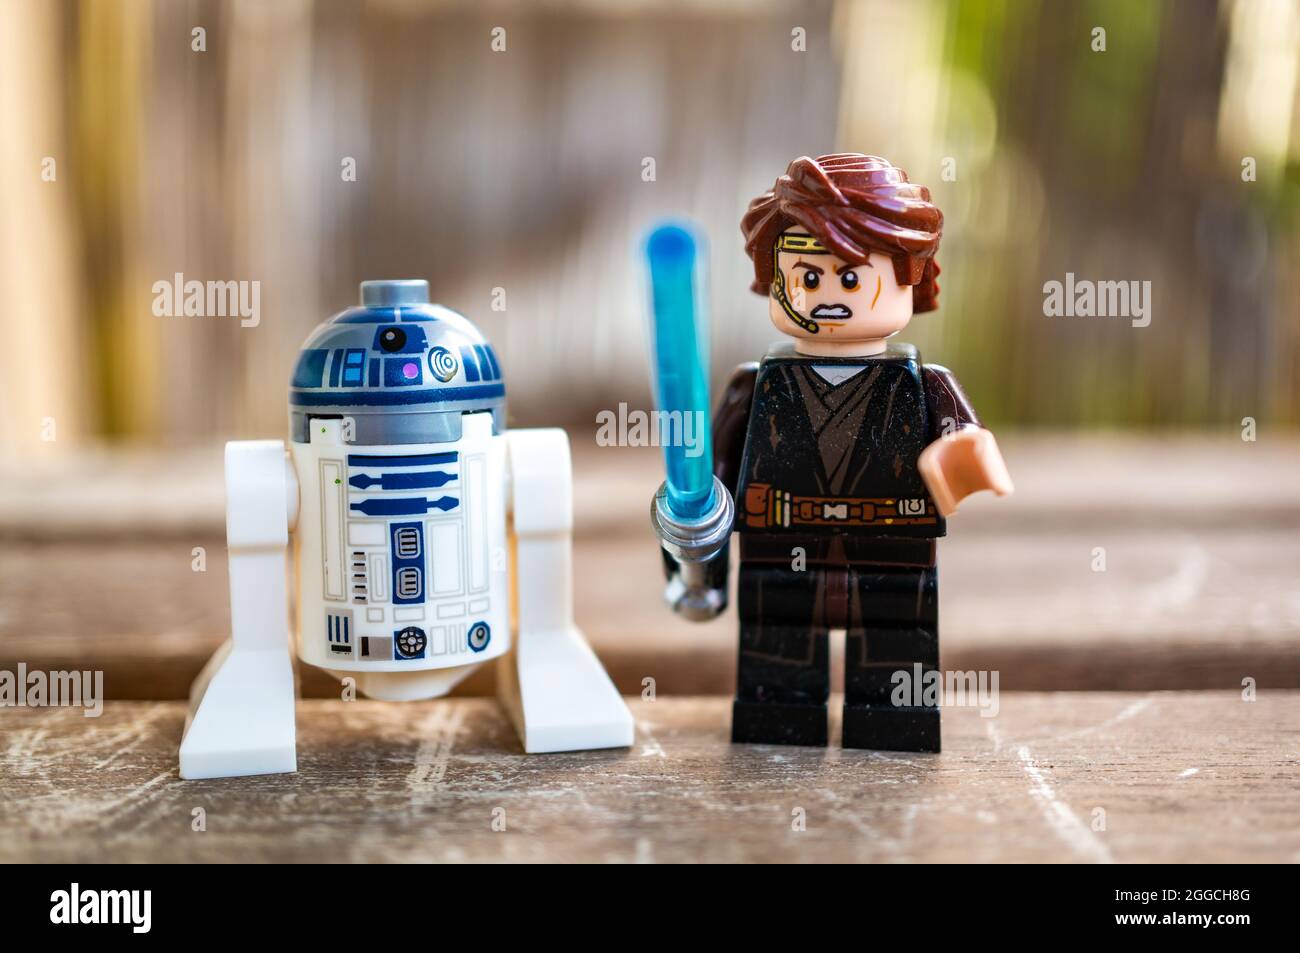 POZNAN, POLAND - Aug 09, 2021: The Lego Star Wars R2 D2 and Anakin Skywalker toy figurines Stock Photo